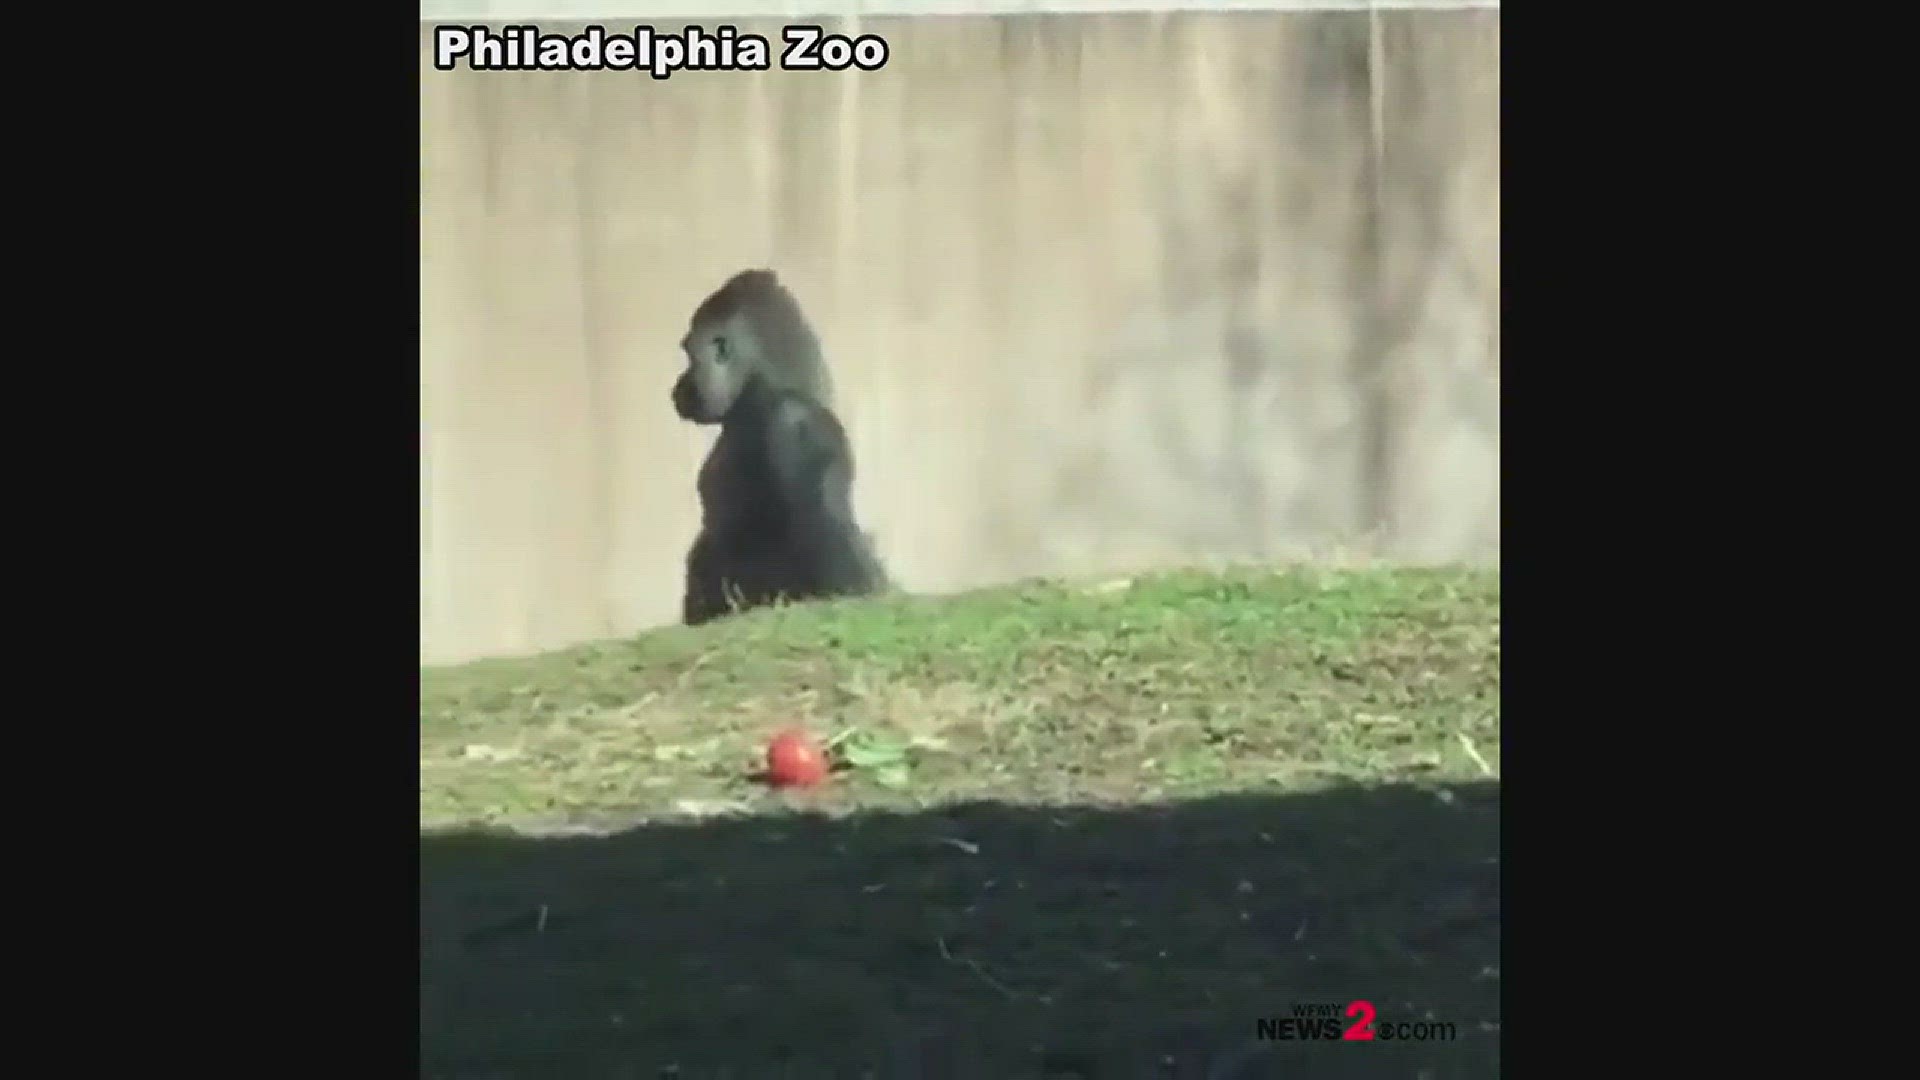 Weighing in at 470 pounds and standing nearly 6' tall, this 18-year-old gorilla prefers to stand on his own two legs.